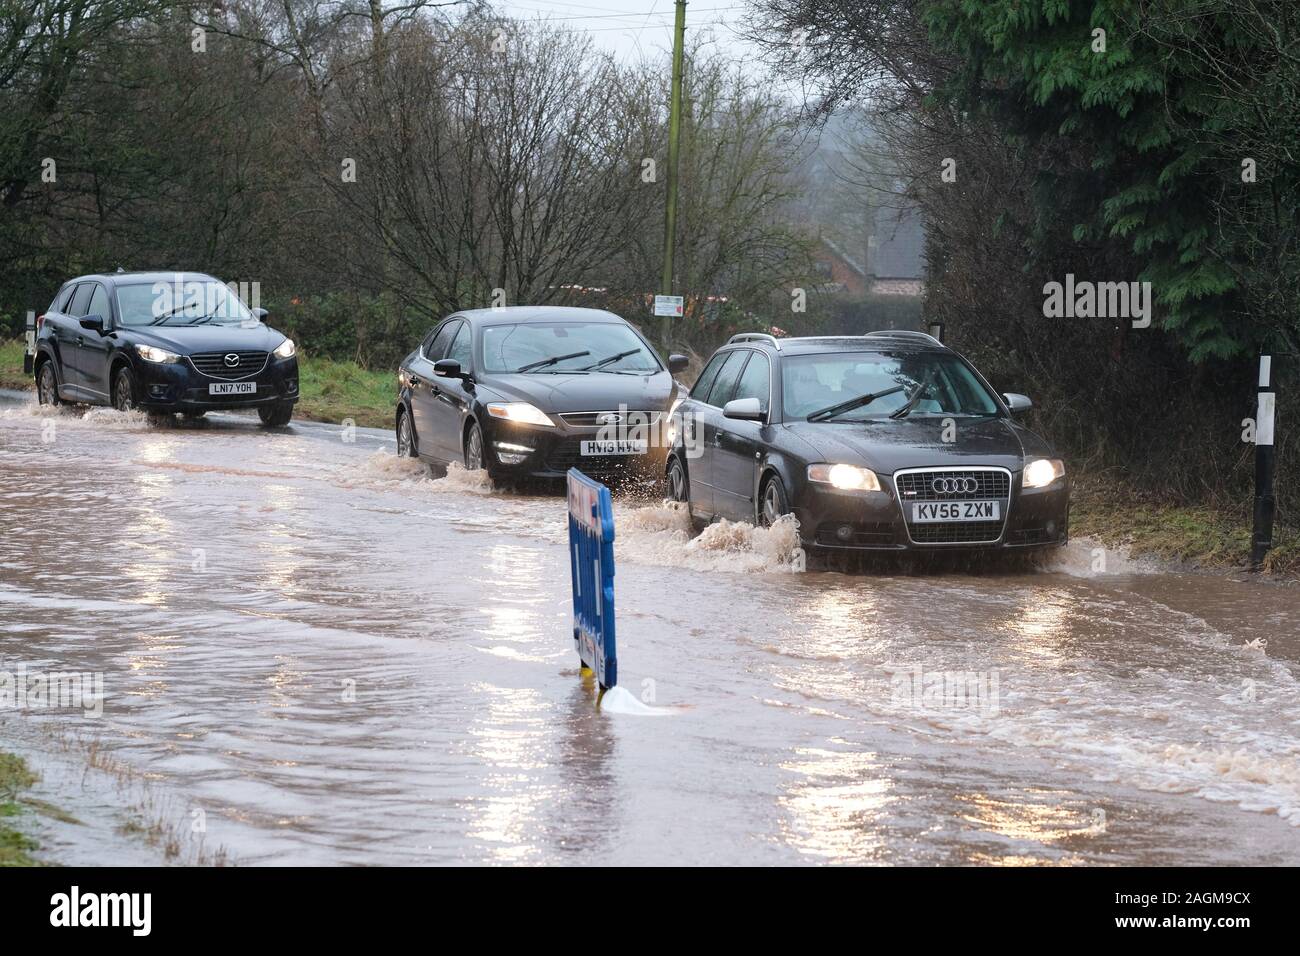 Maund Bryan, near Bodenham, Herefordshire, UK - Friday 20th December 2019 - Further heavy rain after a very wet winter has resulted in surface flooding on the main A417 road at Maund Bryan causing problems for drivers - Photo Steven May / Alamy Live News Stock Photo